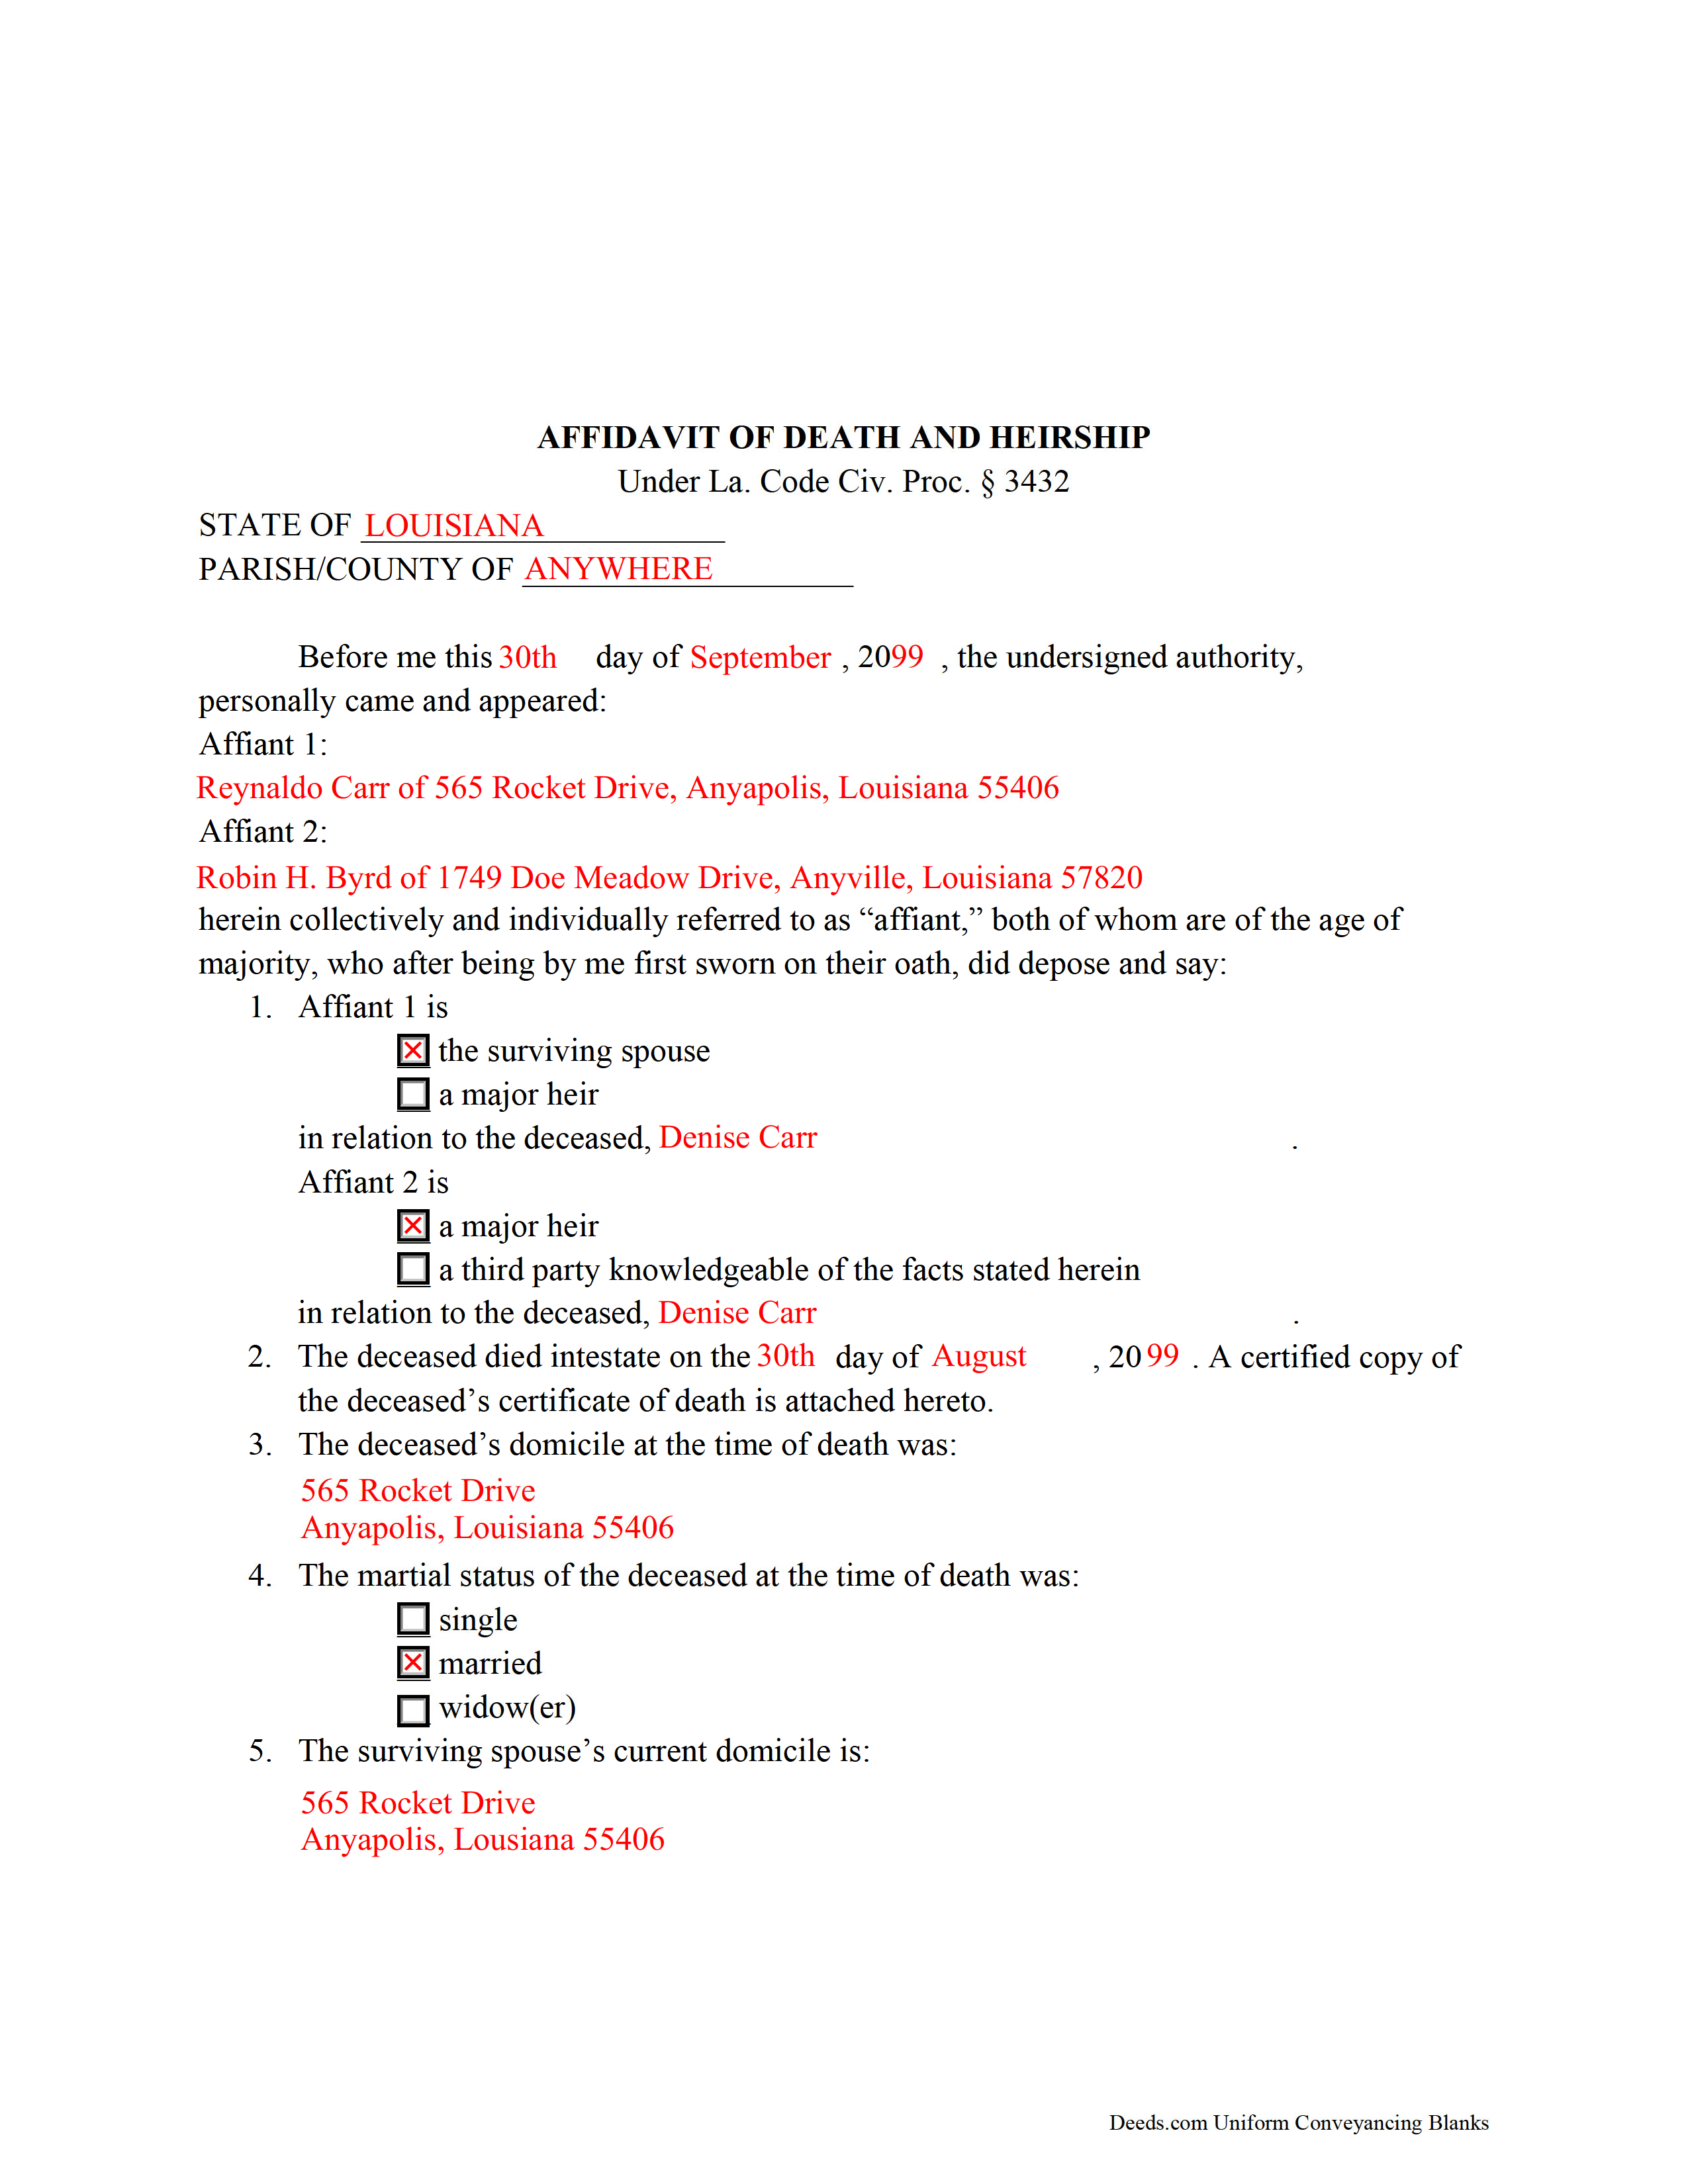 Completed Example of the Affidavit of Death and Heirship Document